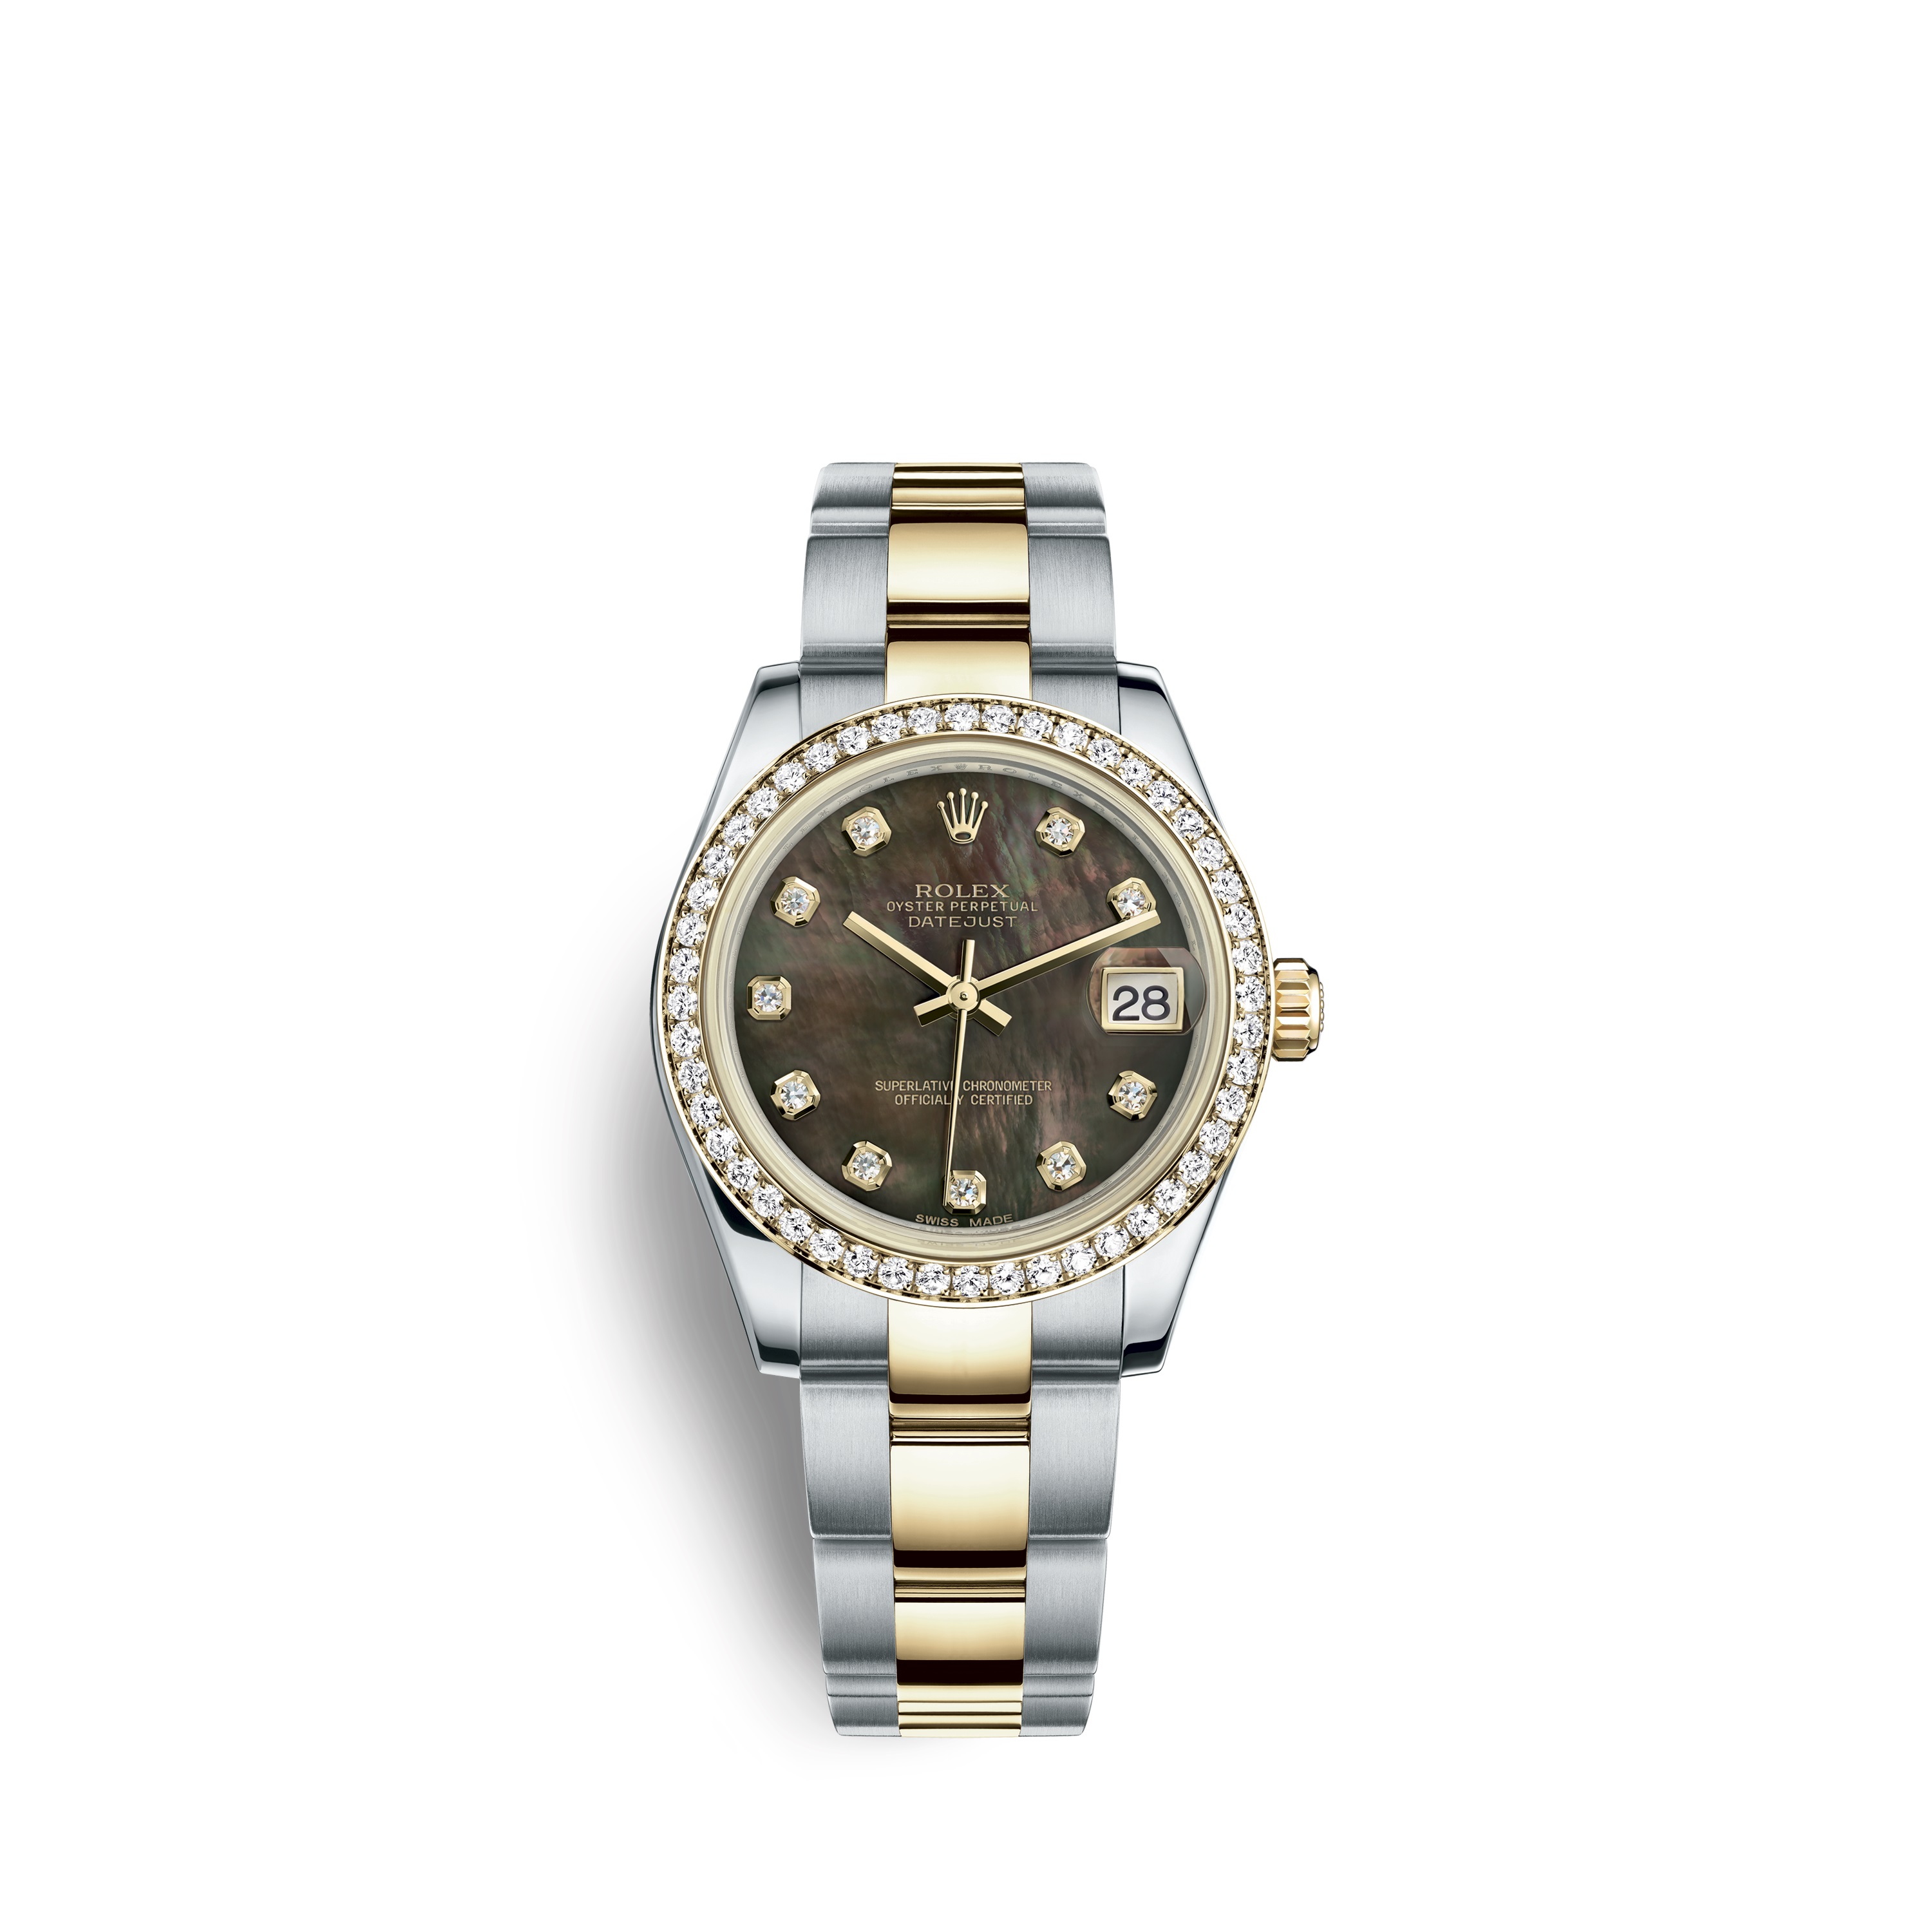 Datejust 31 178383 Gold and Stainless Steel Watch (Black Mother-of-Pearl Set with Diamonds)